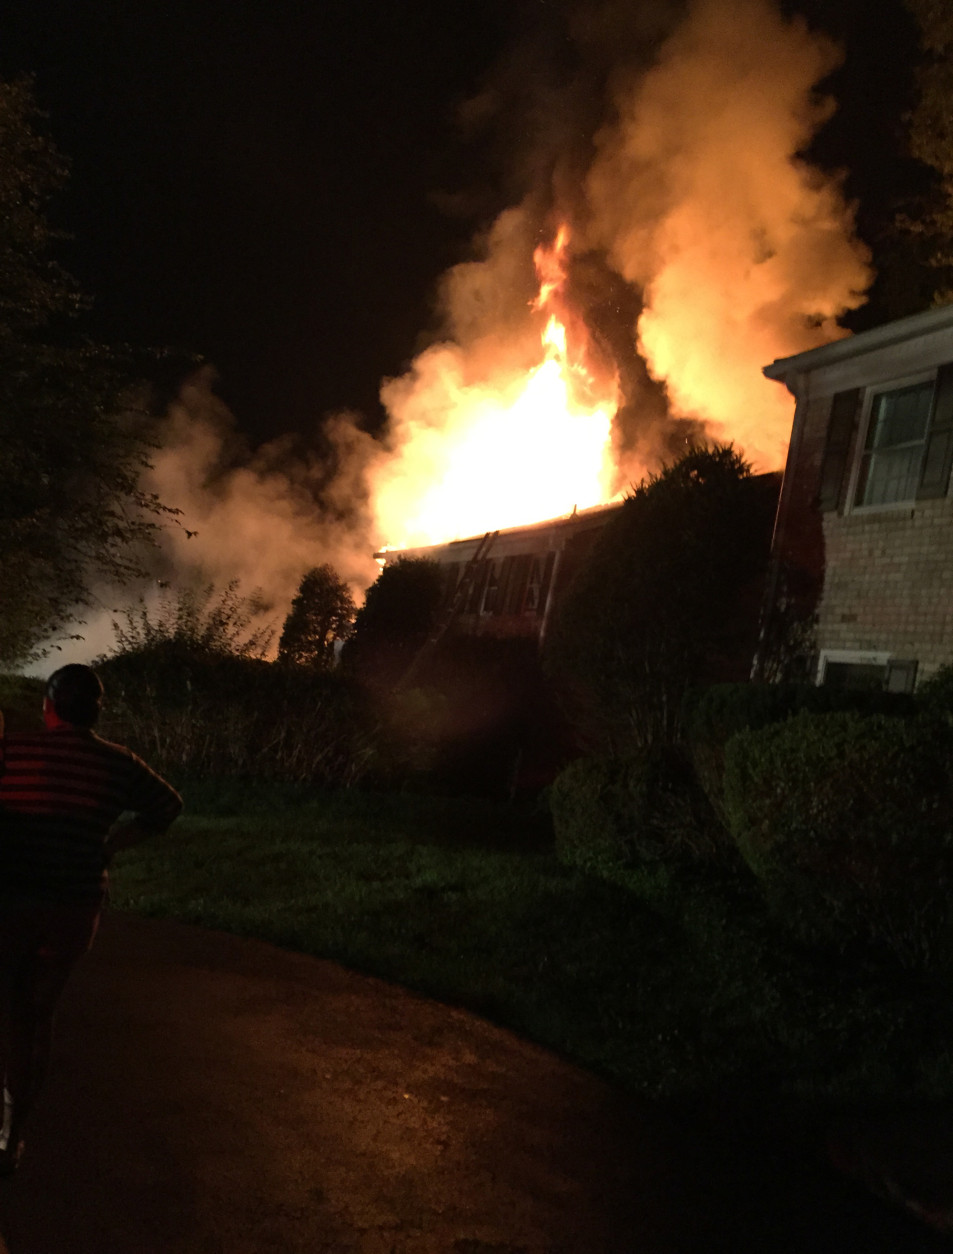 In this photo taken by a neighbor, the house on White Drive in Colesville burns. (Courtesy of Bryan Ramirez)